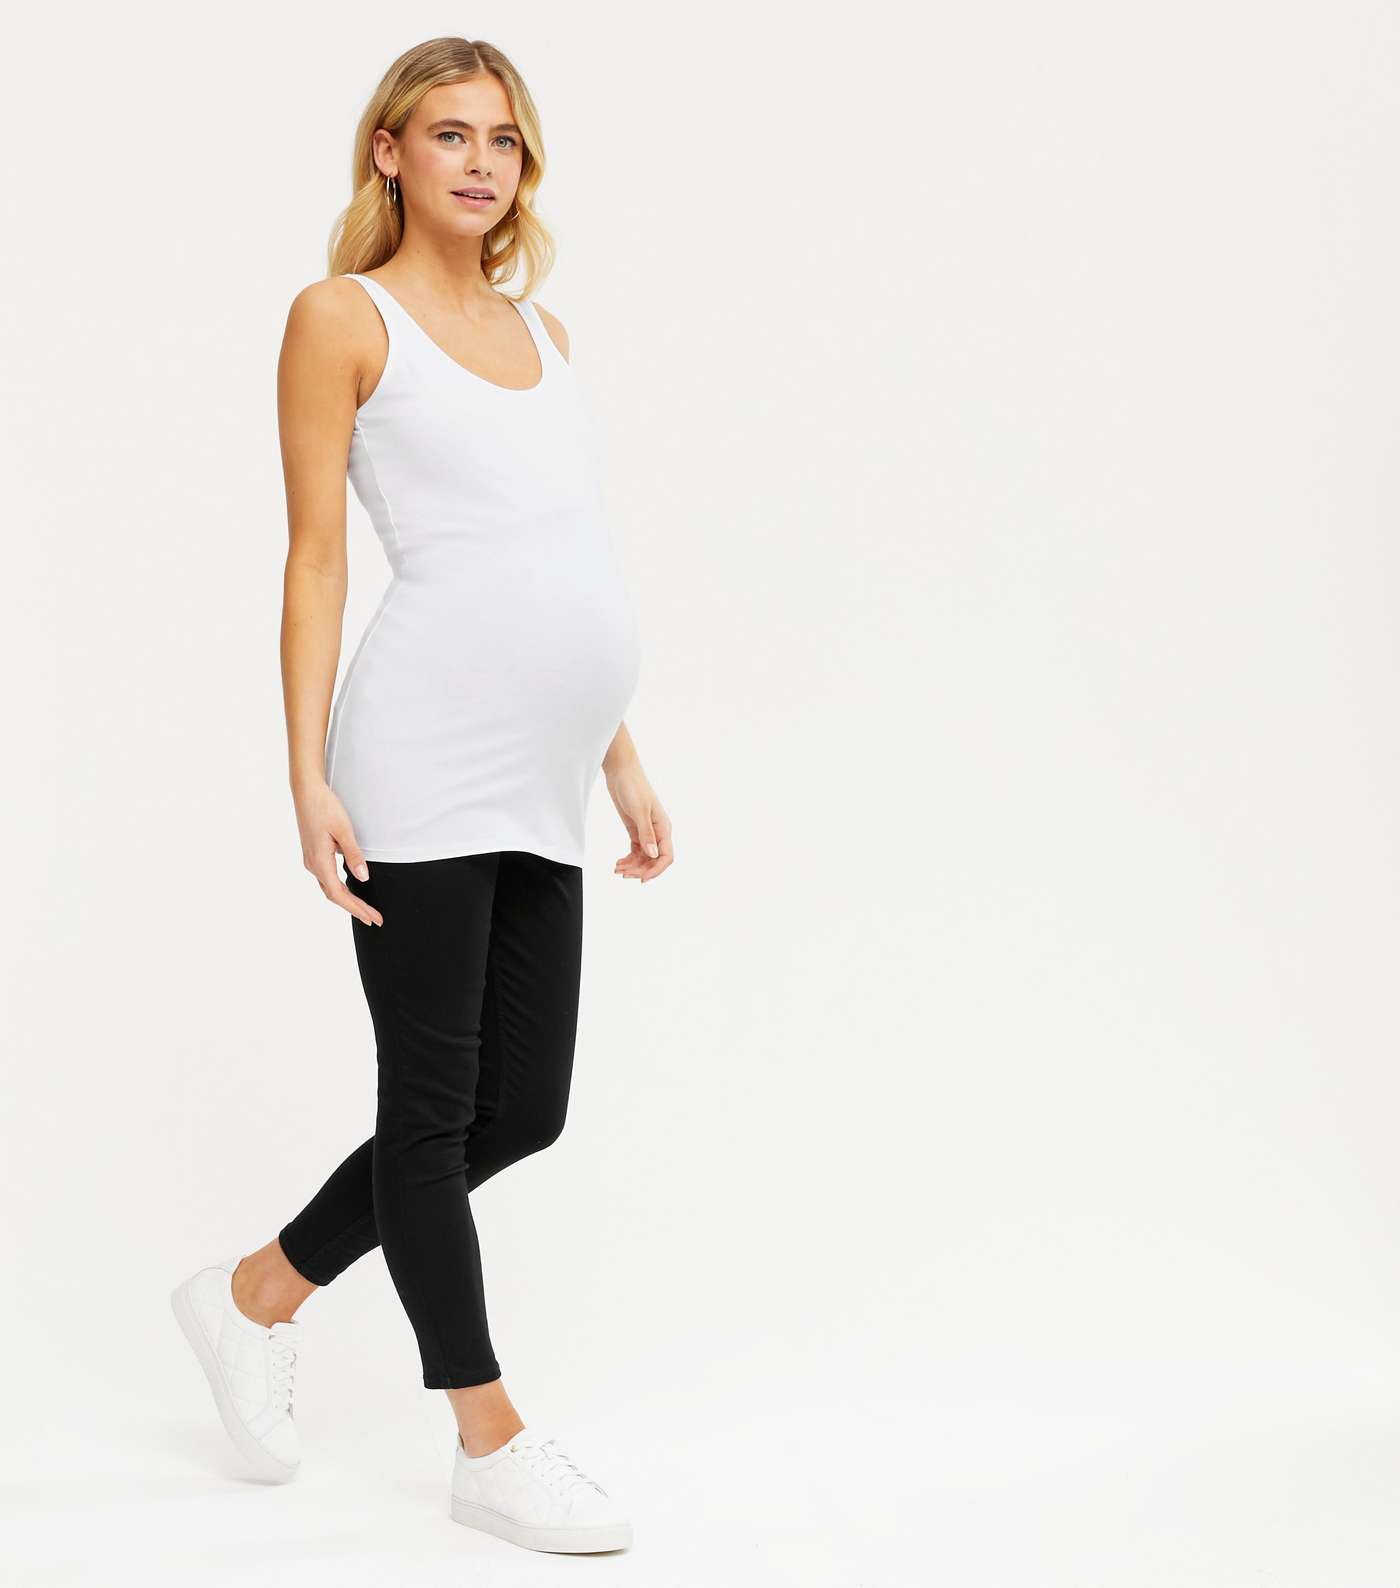 Maternity 3 Pack Black and White Long Camis Image 2